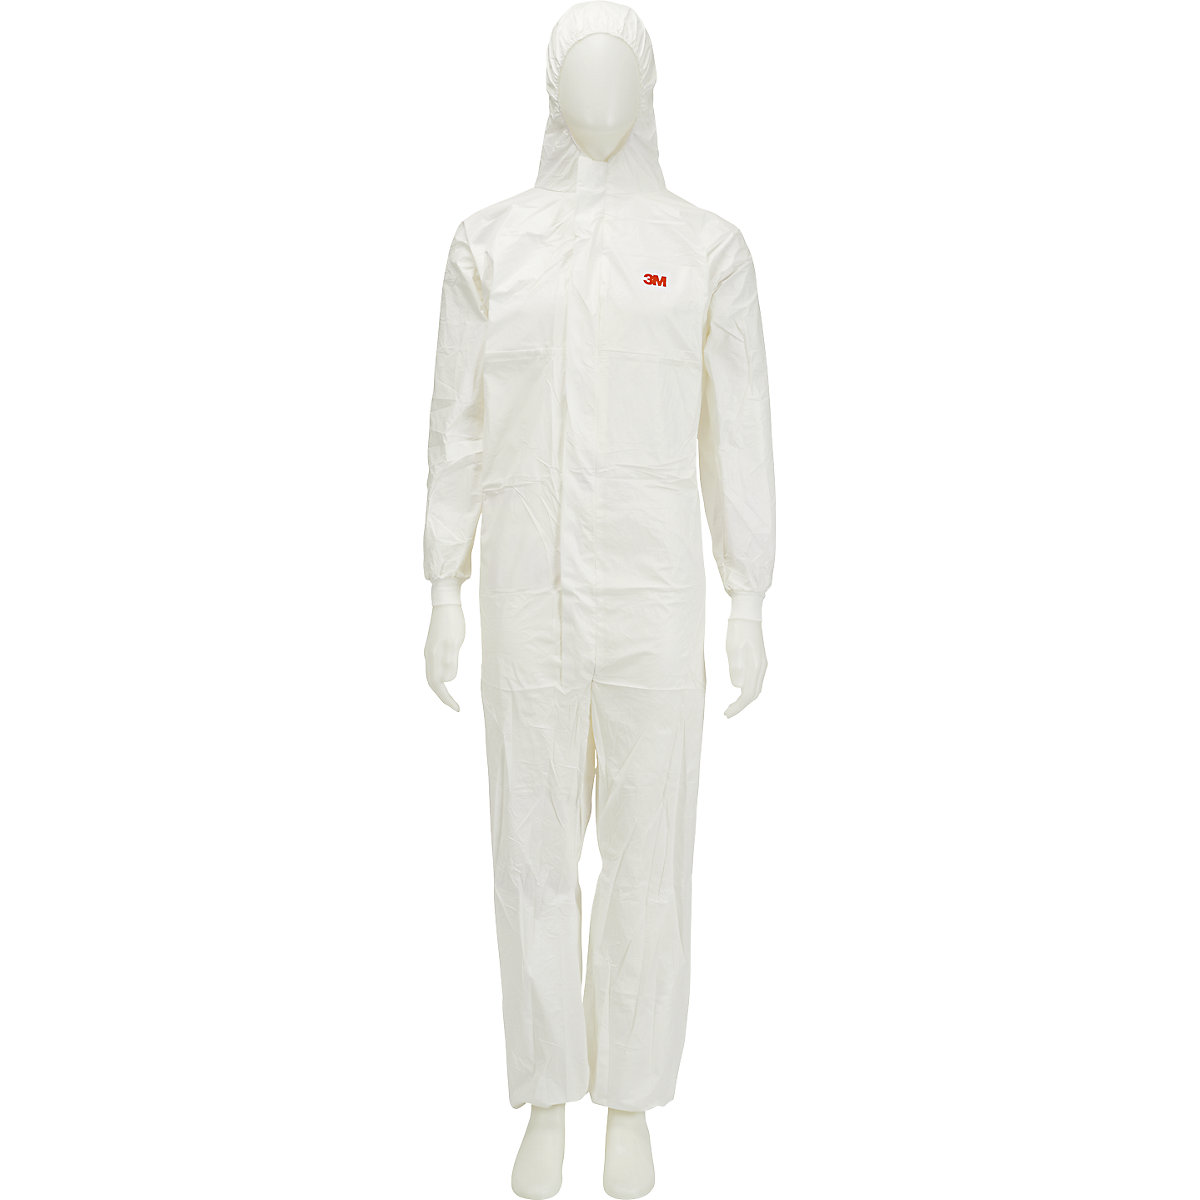 Disposable protective suit 4545 (Type 5/6) - 3M